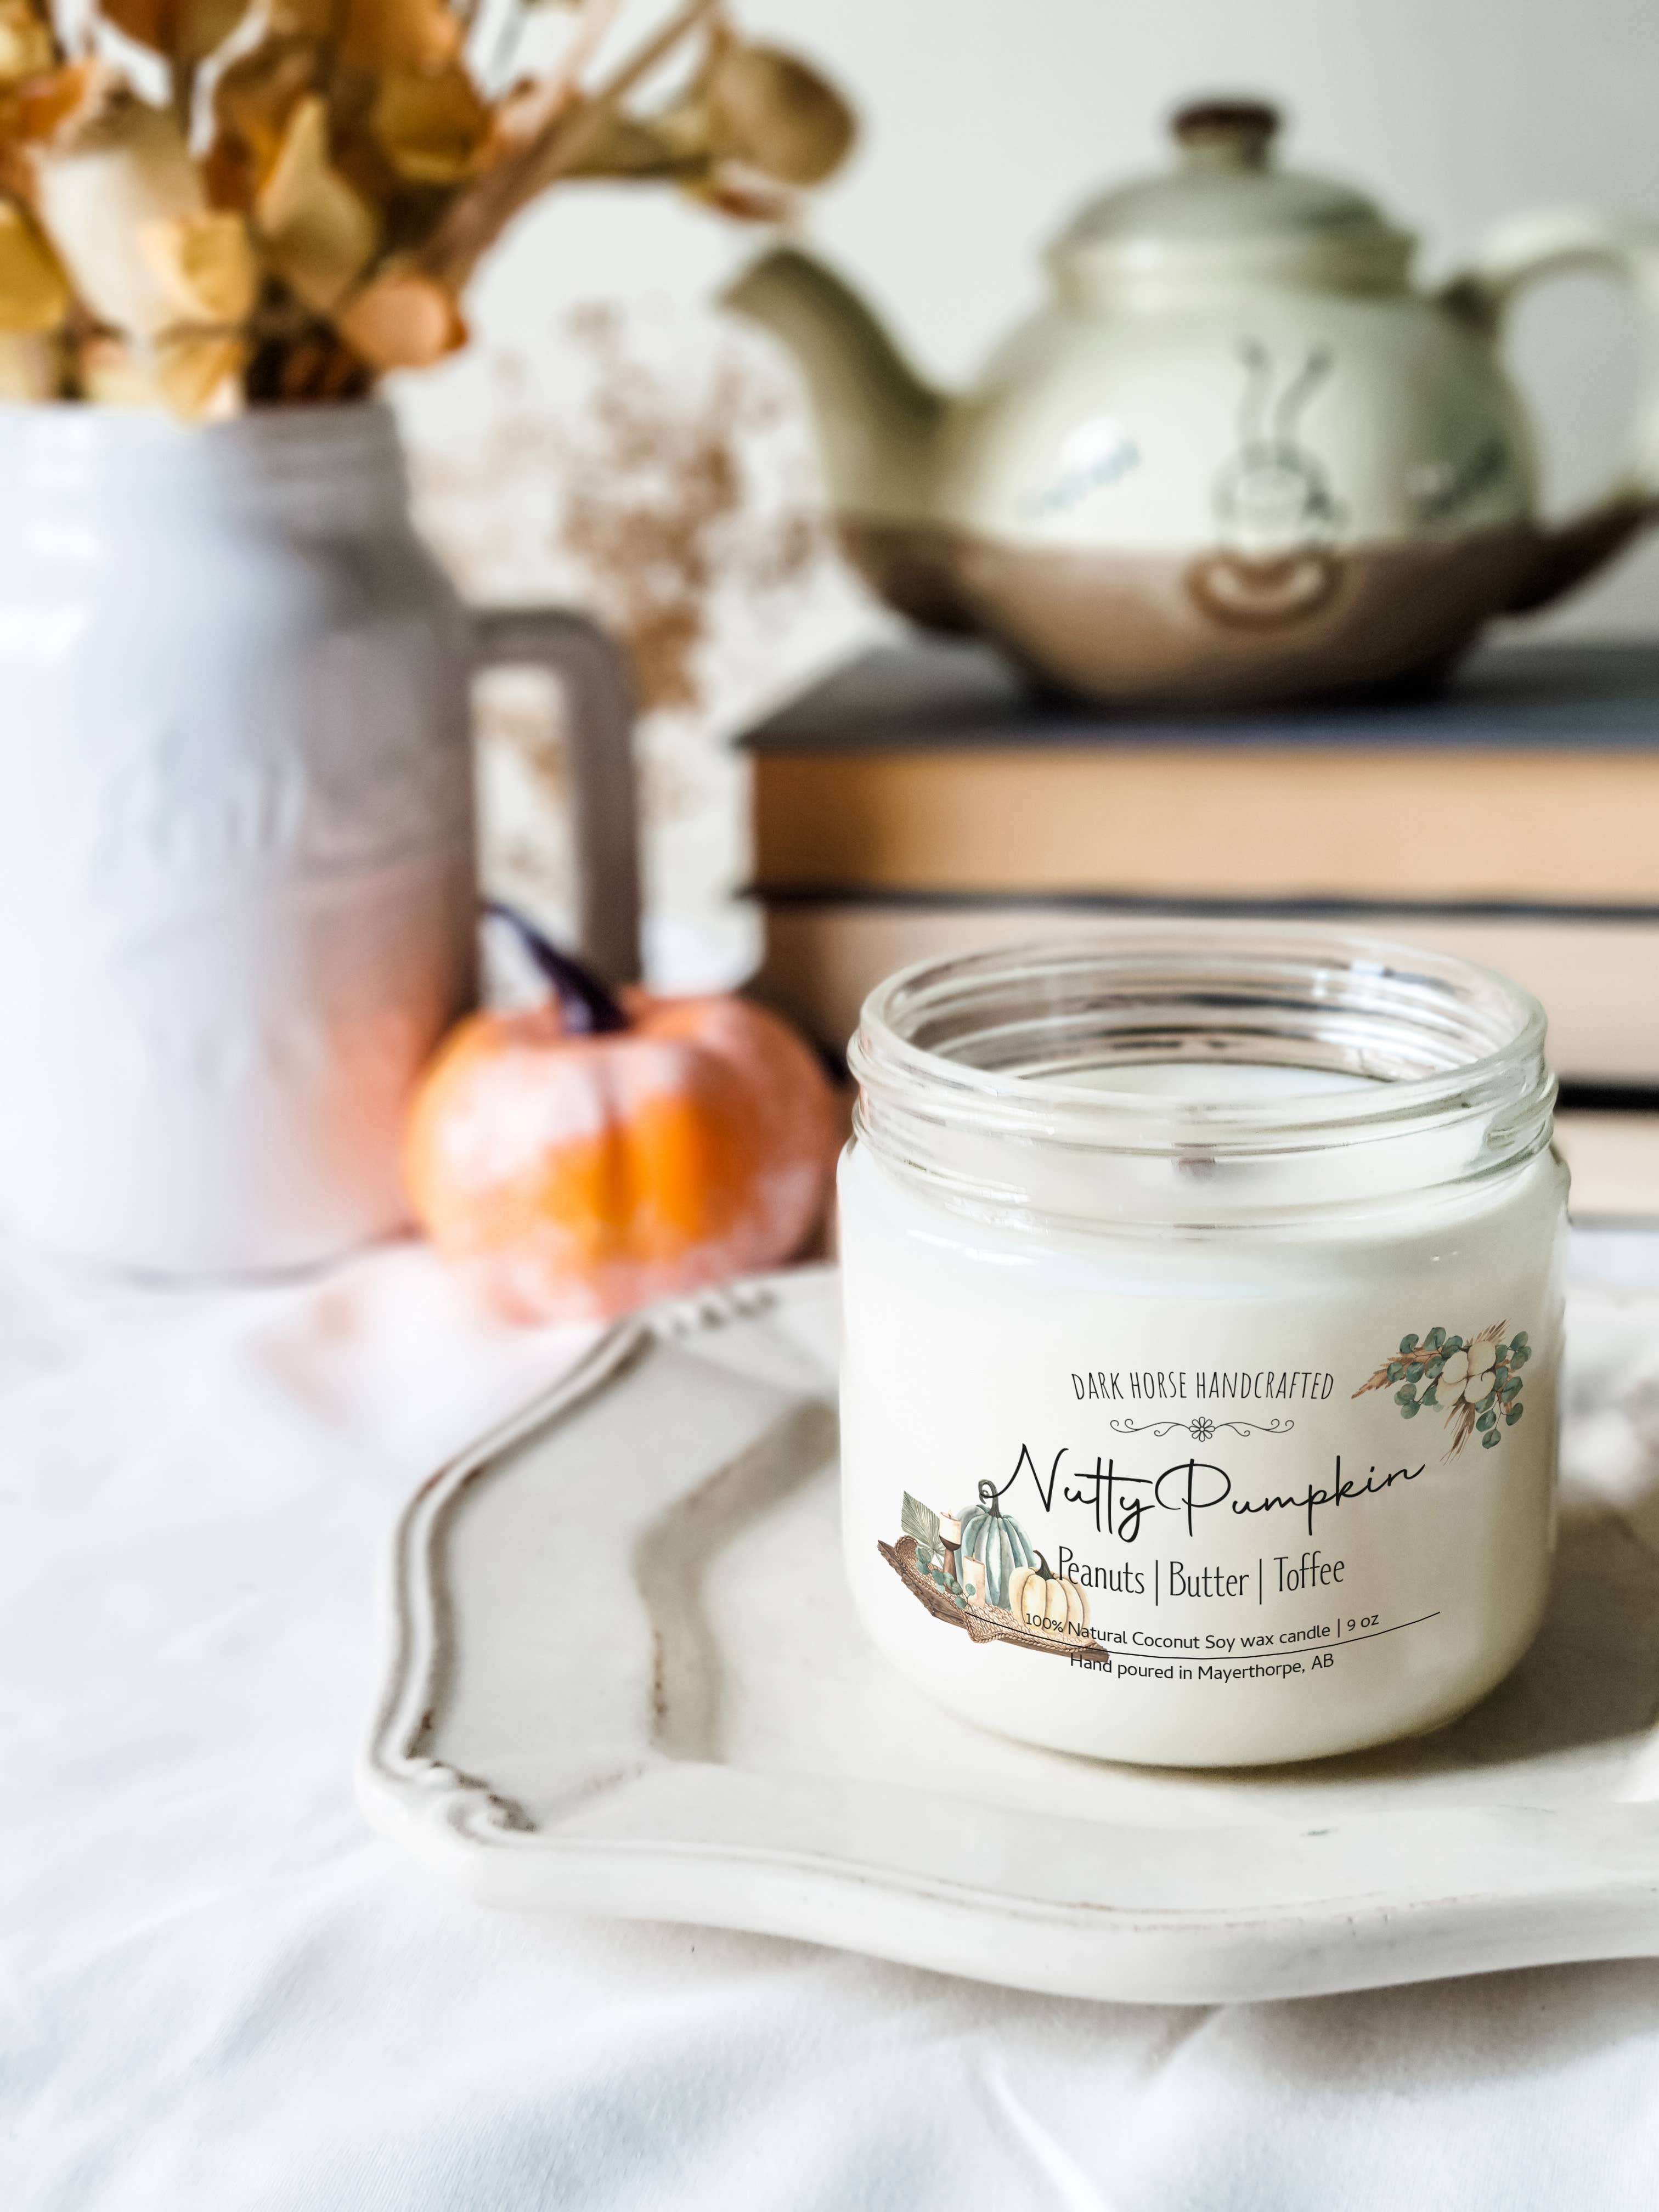 Nutty Pumpkin - Fall season, Natural Coconut Soy Candle